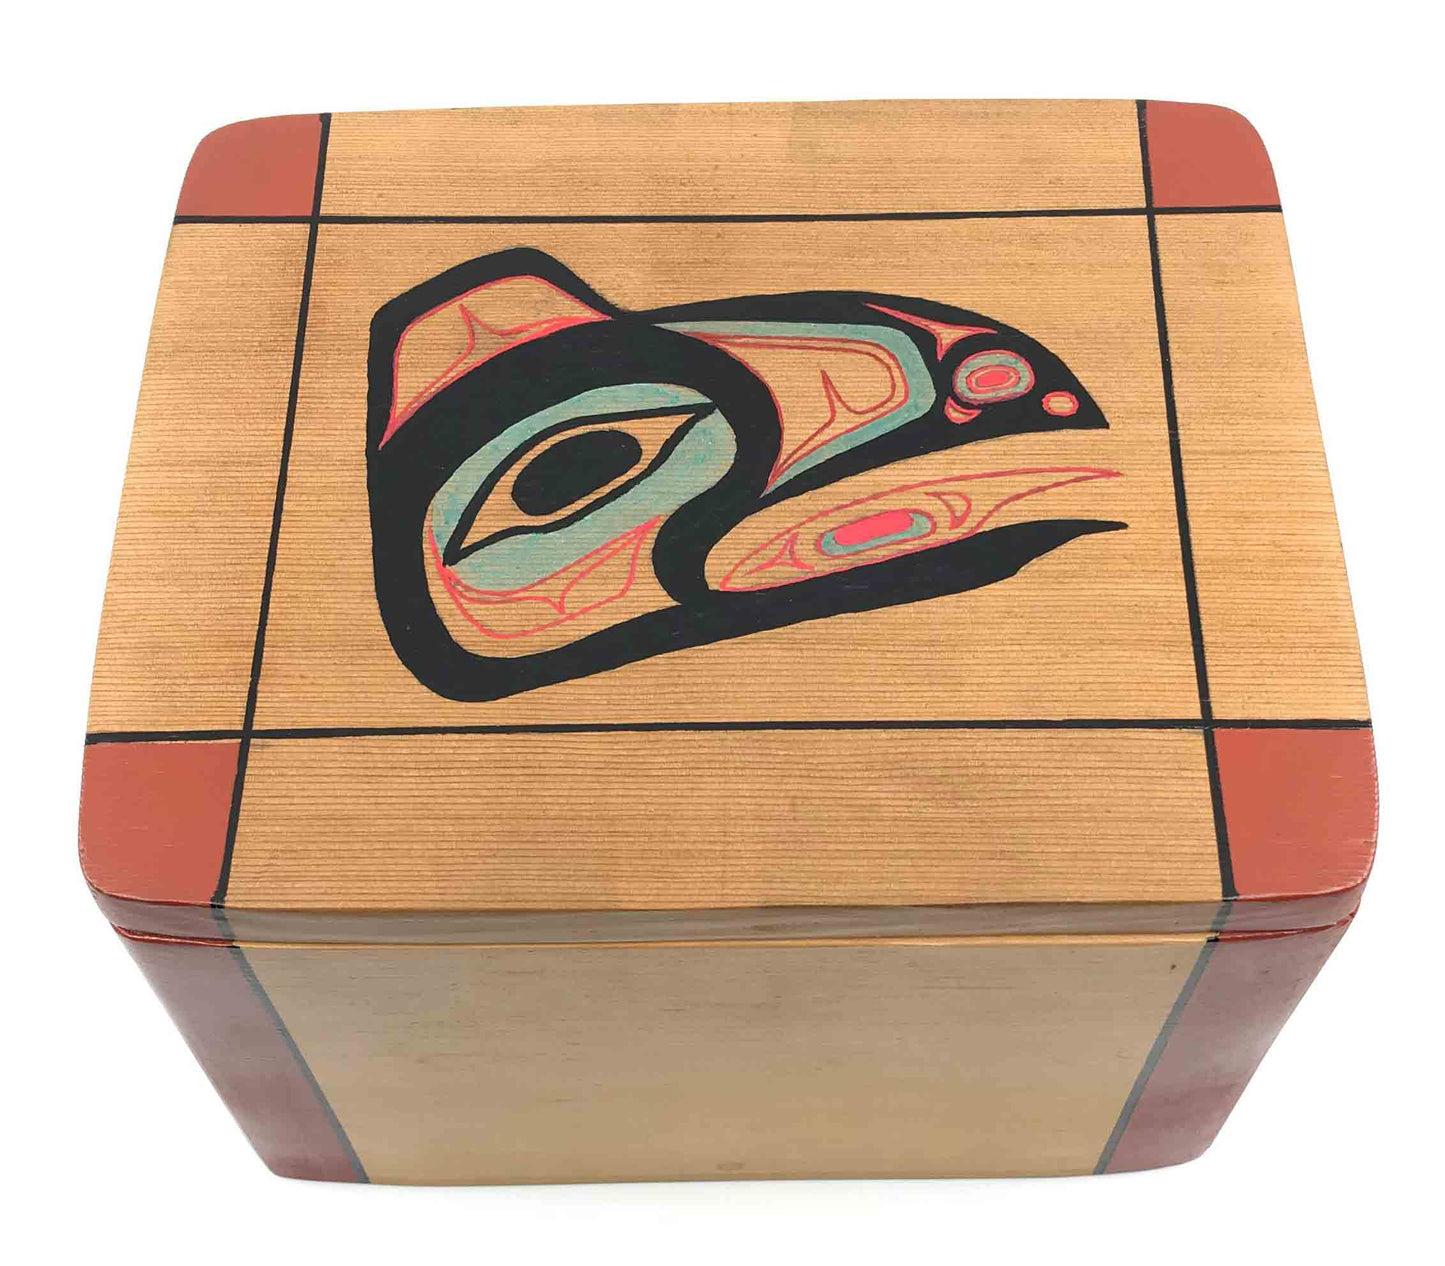 Urn- Z. Boxley, Traditional Bentwood Box